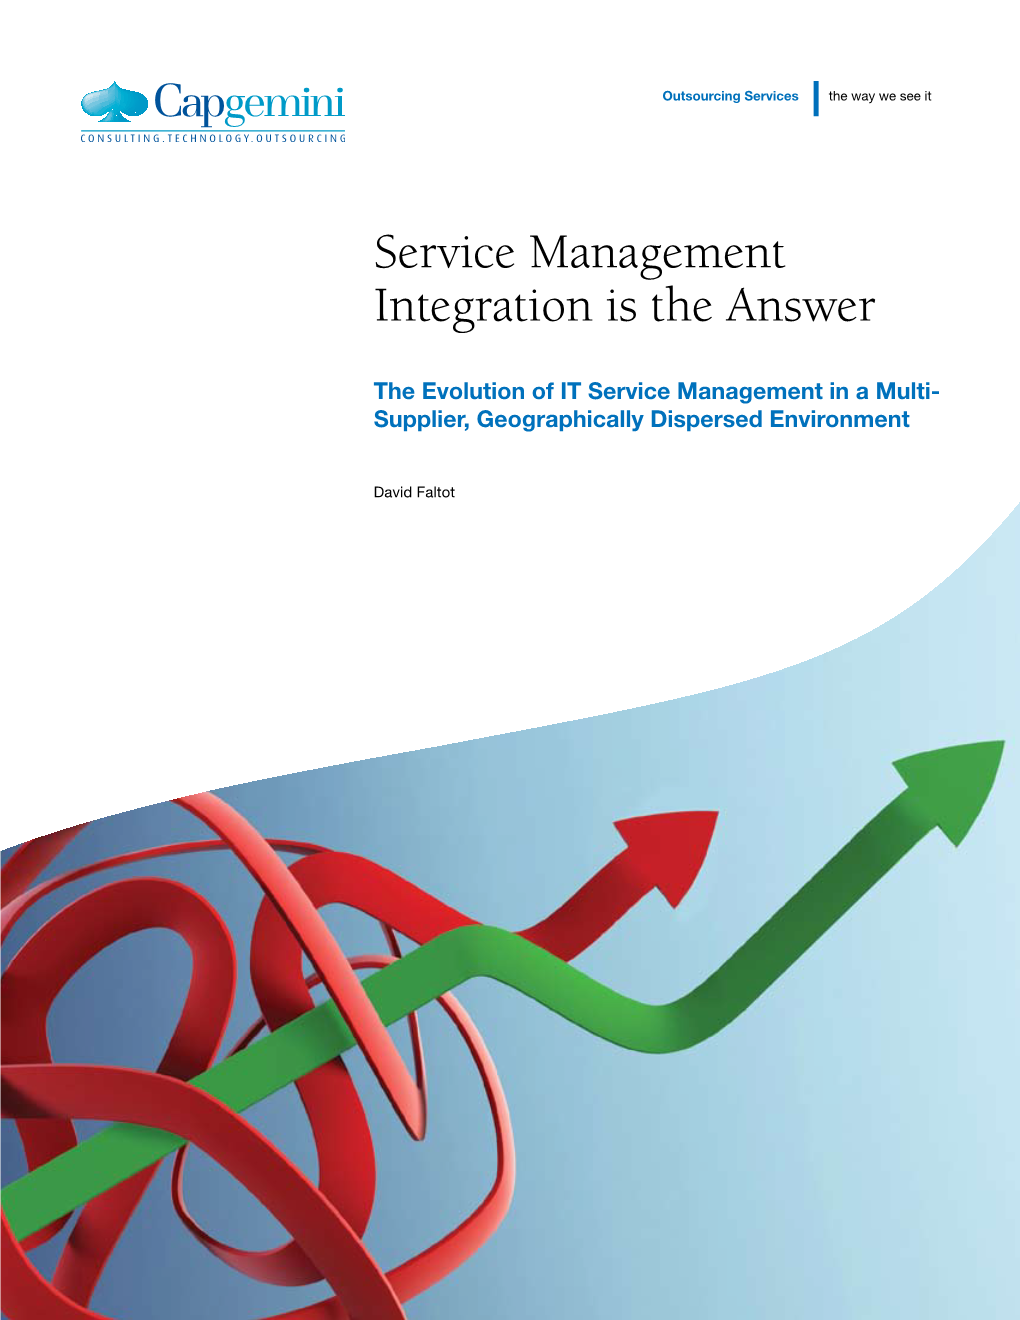 Service Management Integration Is the Answer